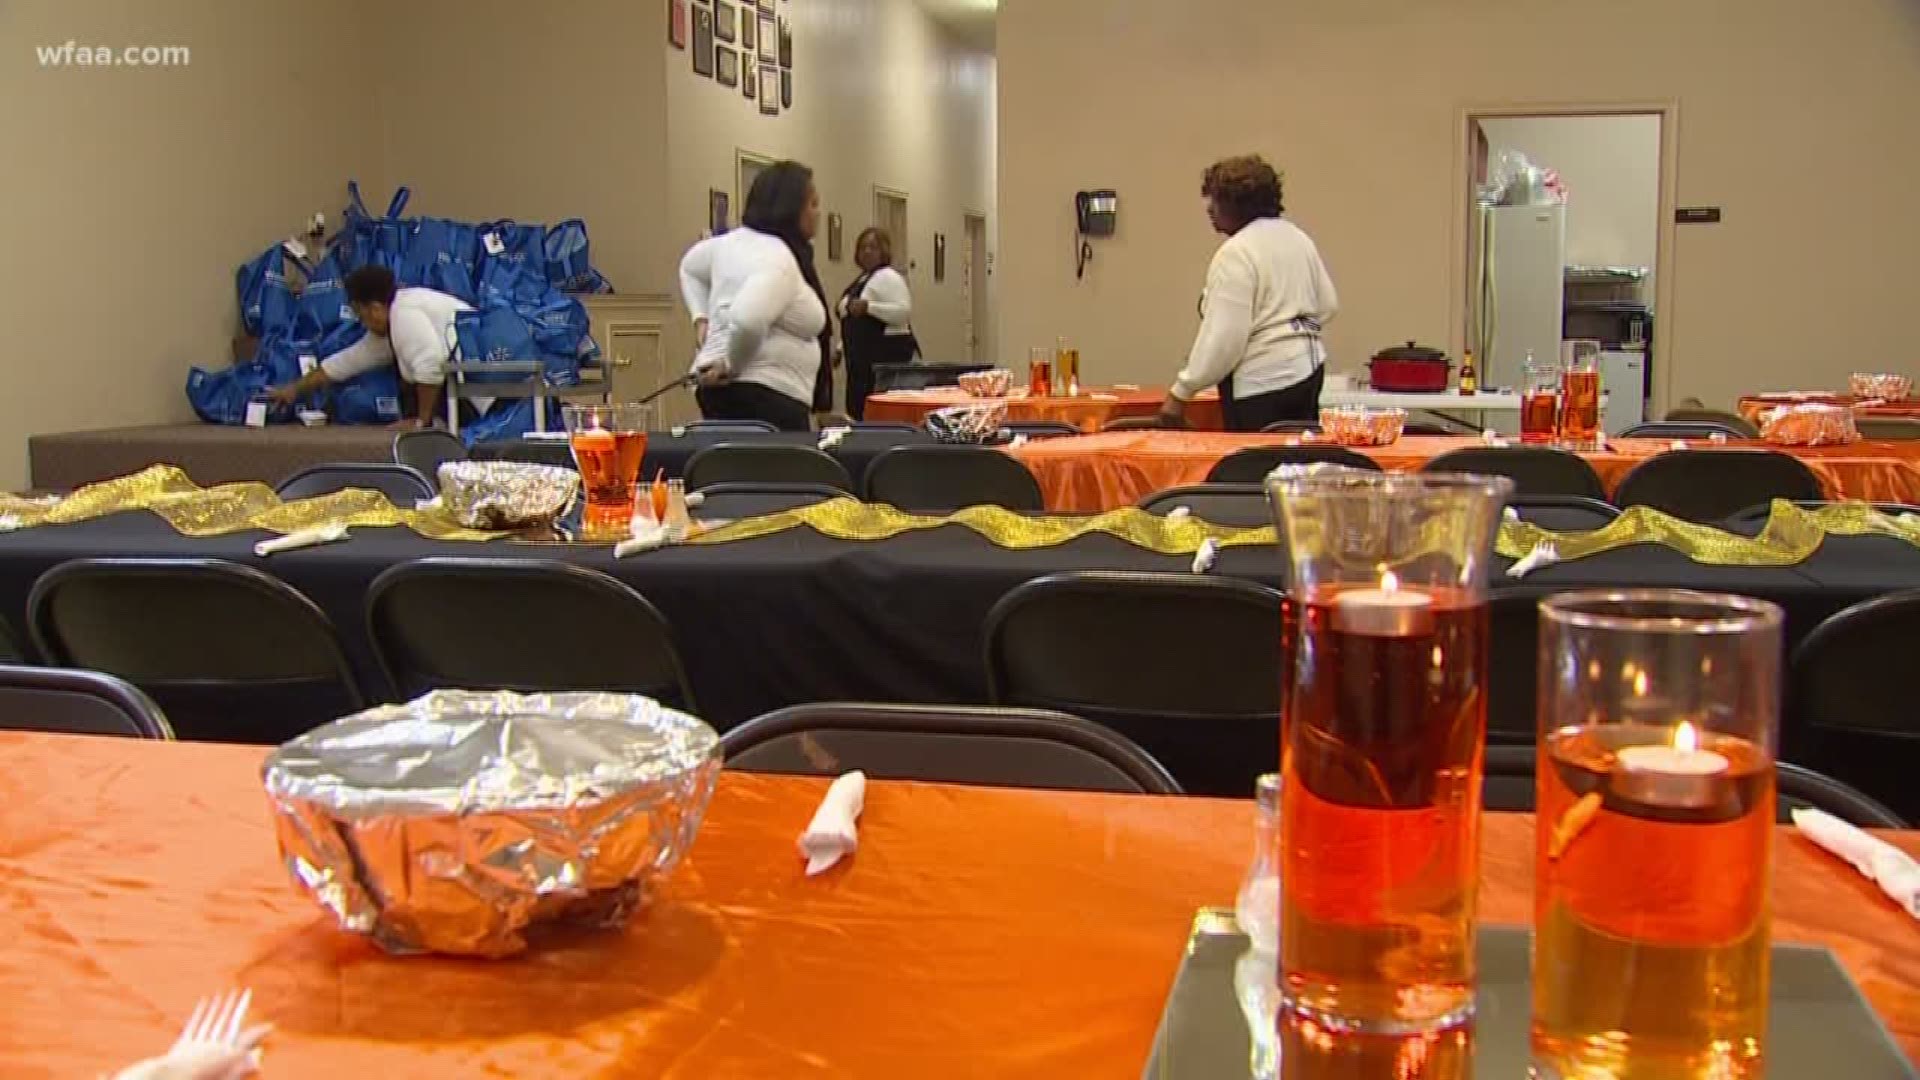 Providing food and faith for Thanksgiving